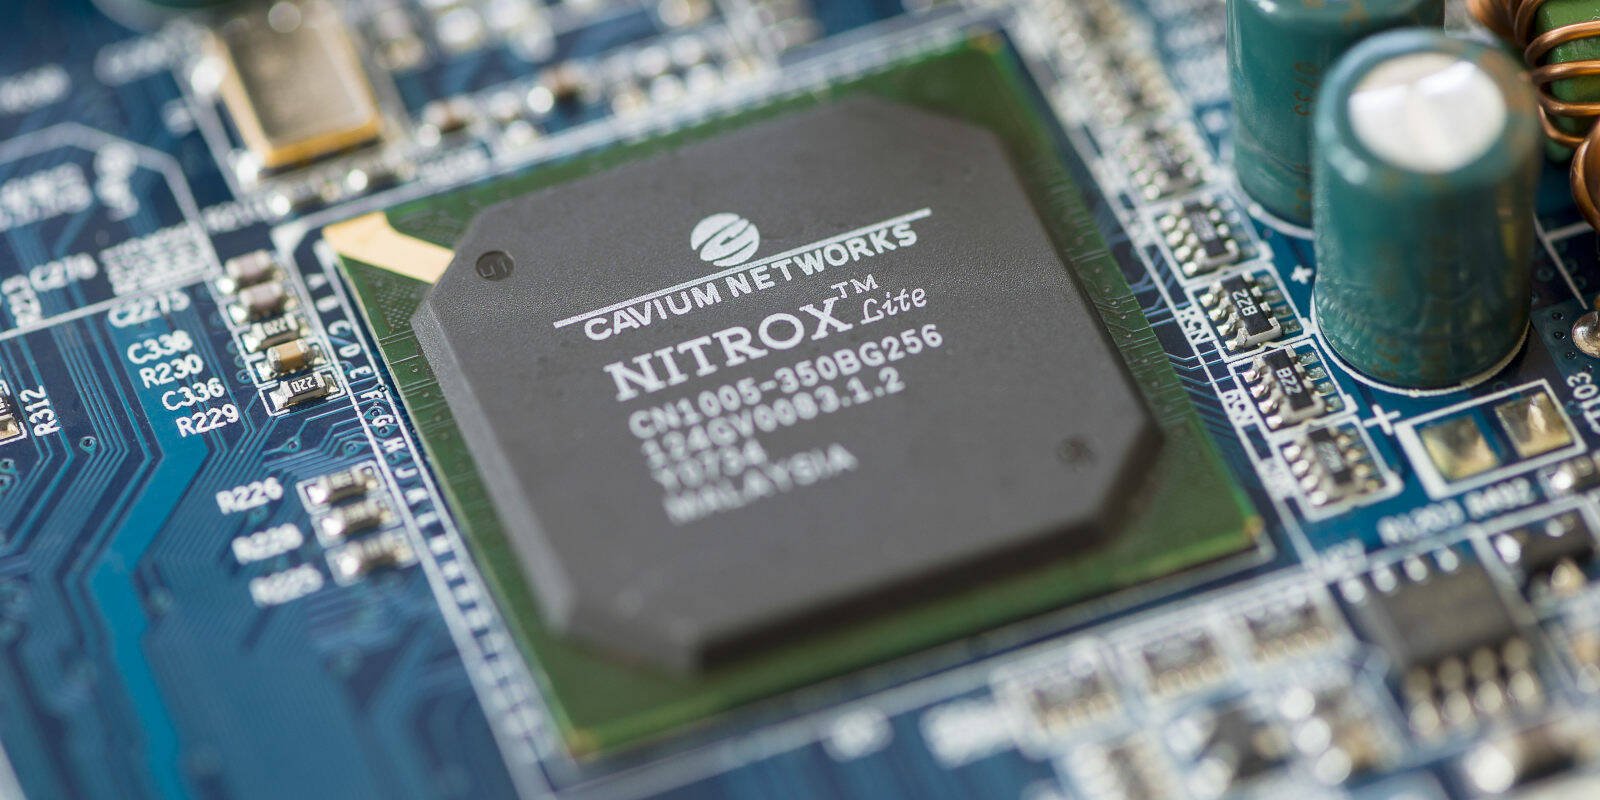 Cavium, a maker of semiconductors acquired in 2018 by Marvell, was allegedly identified in documents leaked in 2013 by Edward Snowden as a vendor of s